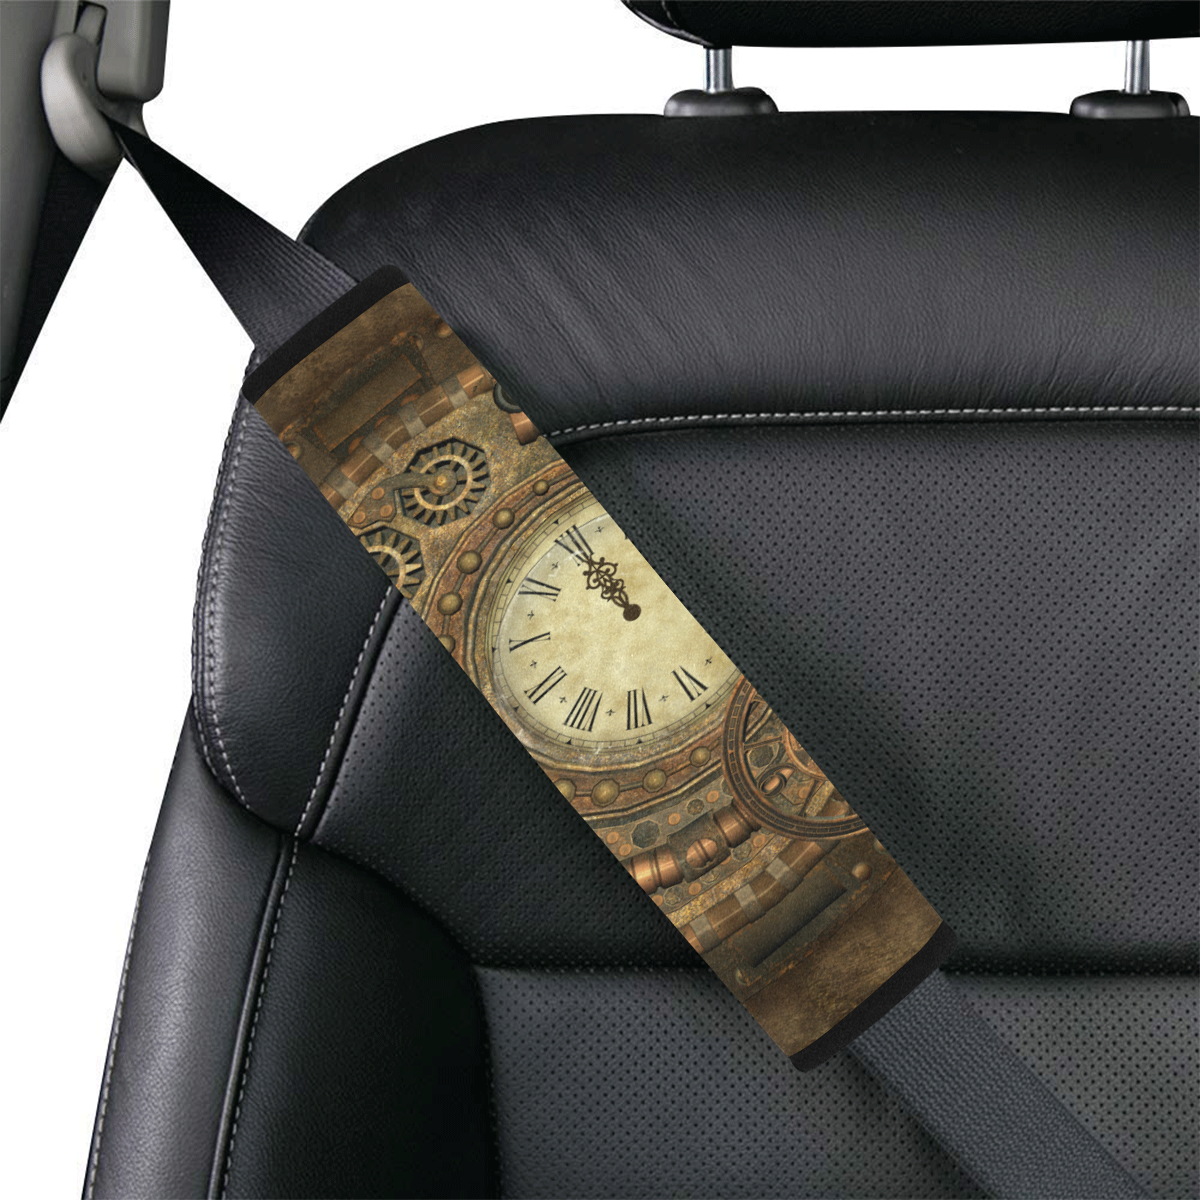 Steampunk, awesome clockwork Car Seat Belt Cover 7''x12.6''